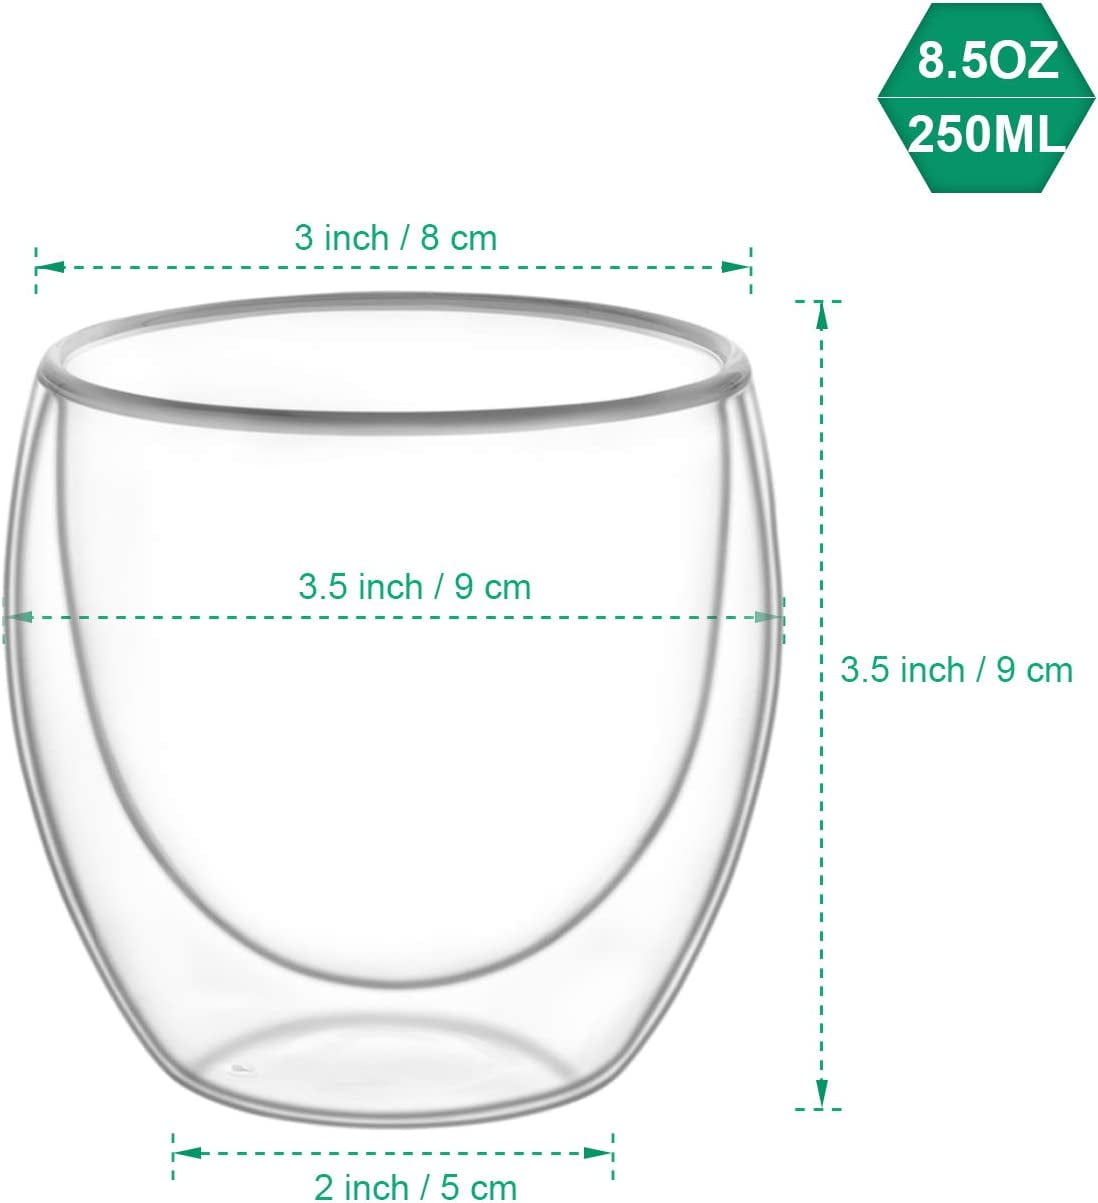 Aquach Double Wall Glass Espresso Cup 8 Oz Set of 2 - Insulated Clear  Coffee Mug for Hot/Cold Drinks, Microwave Safe